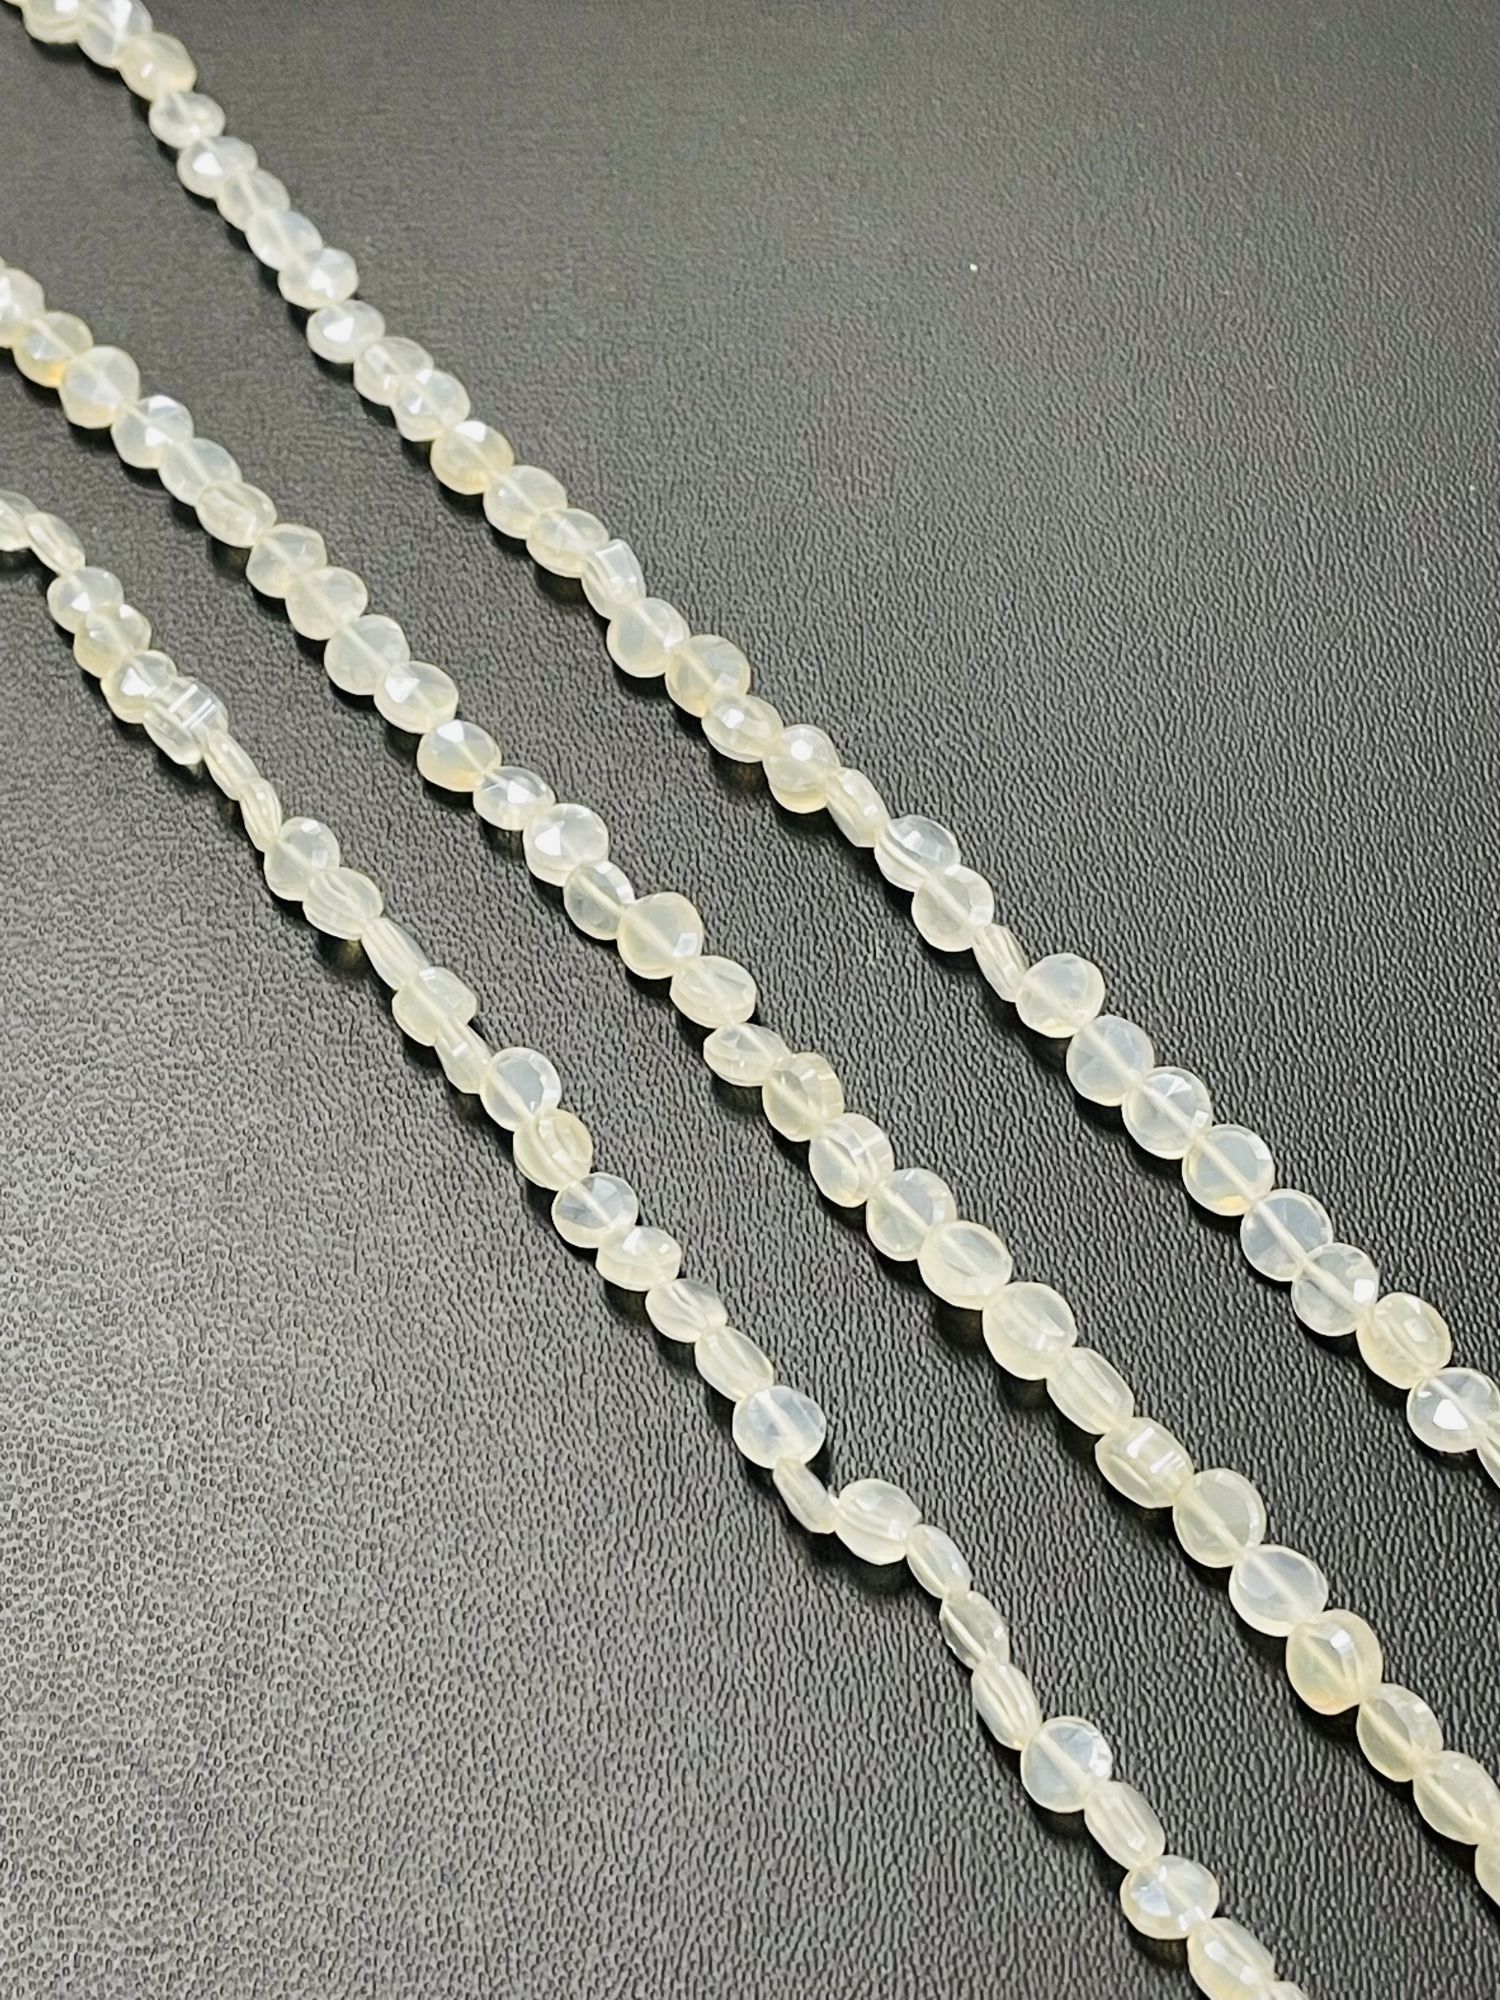 Pearl White Chalcedony Coin Faceted